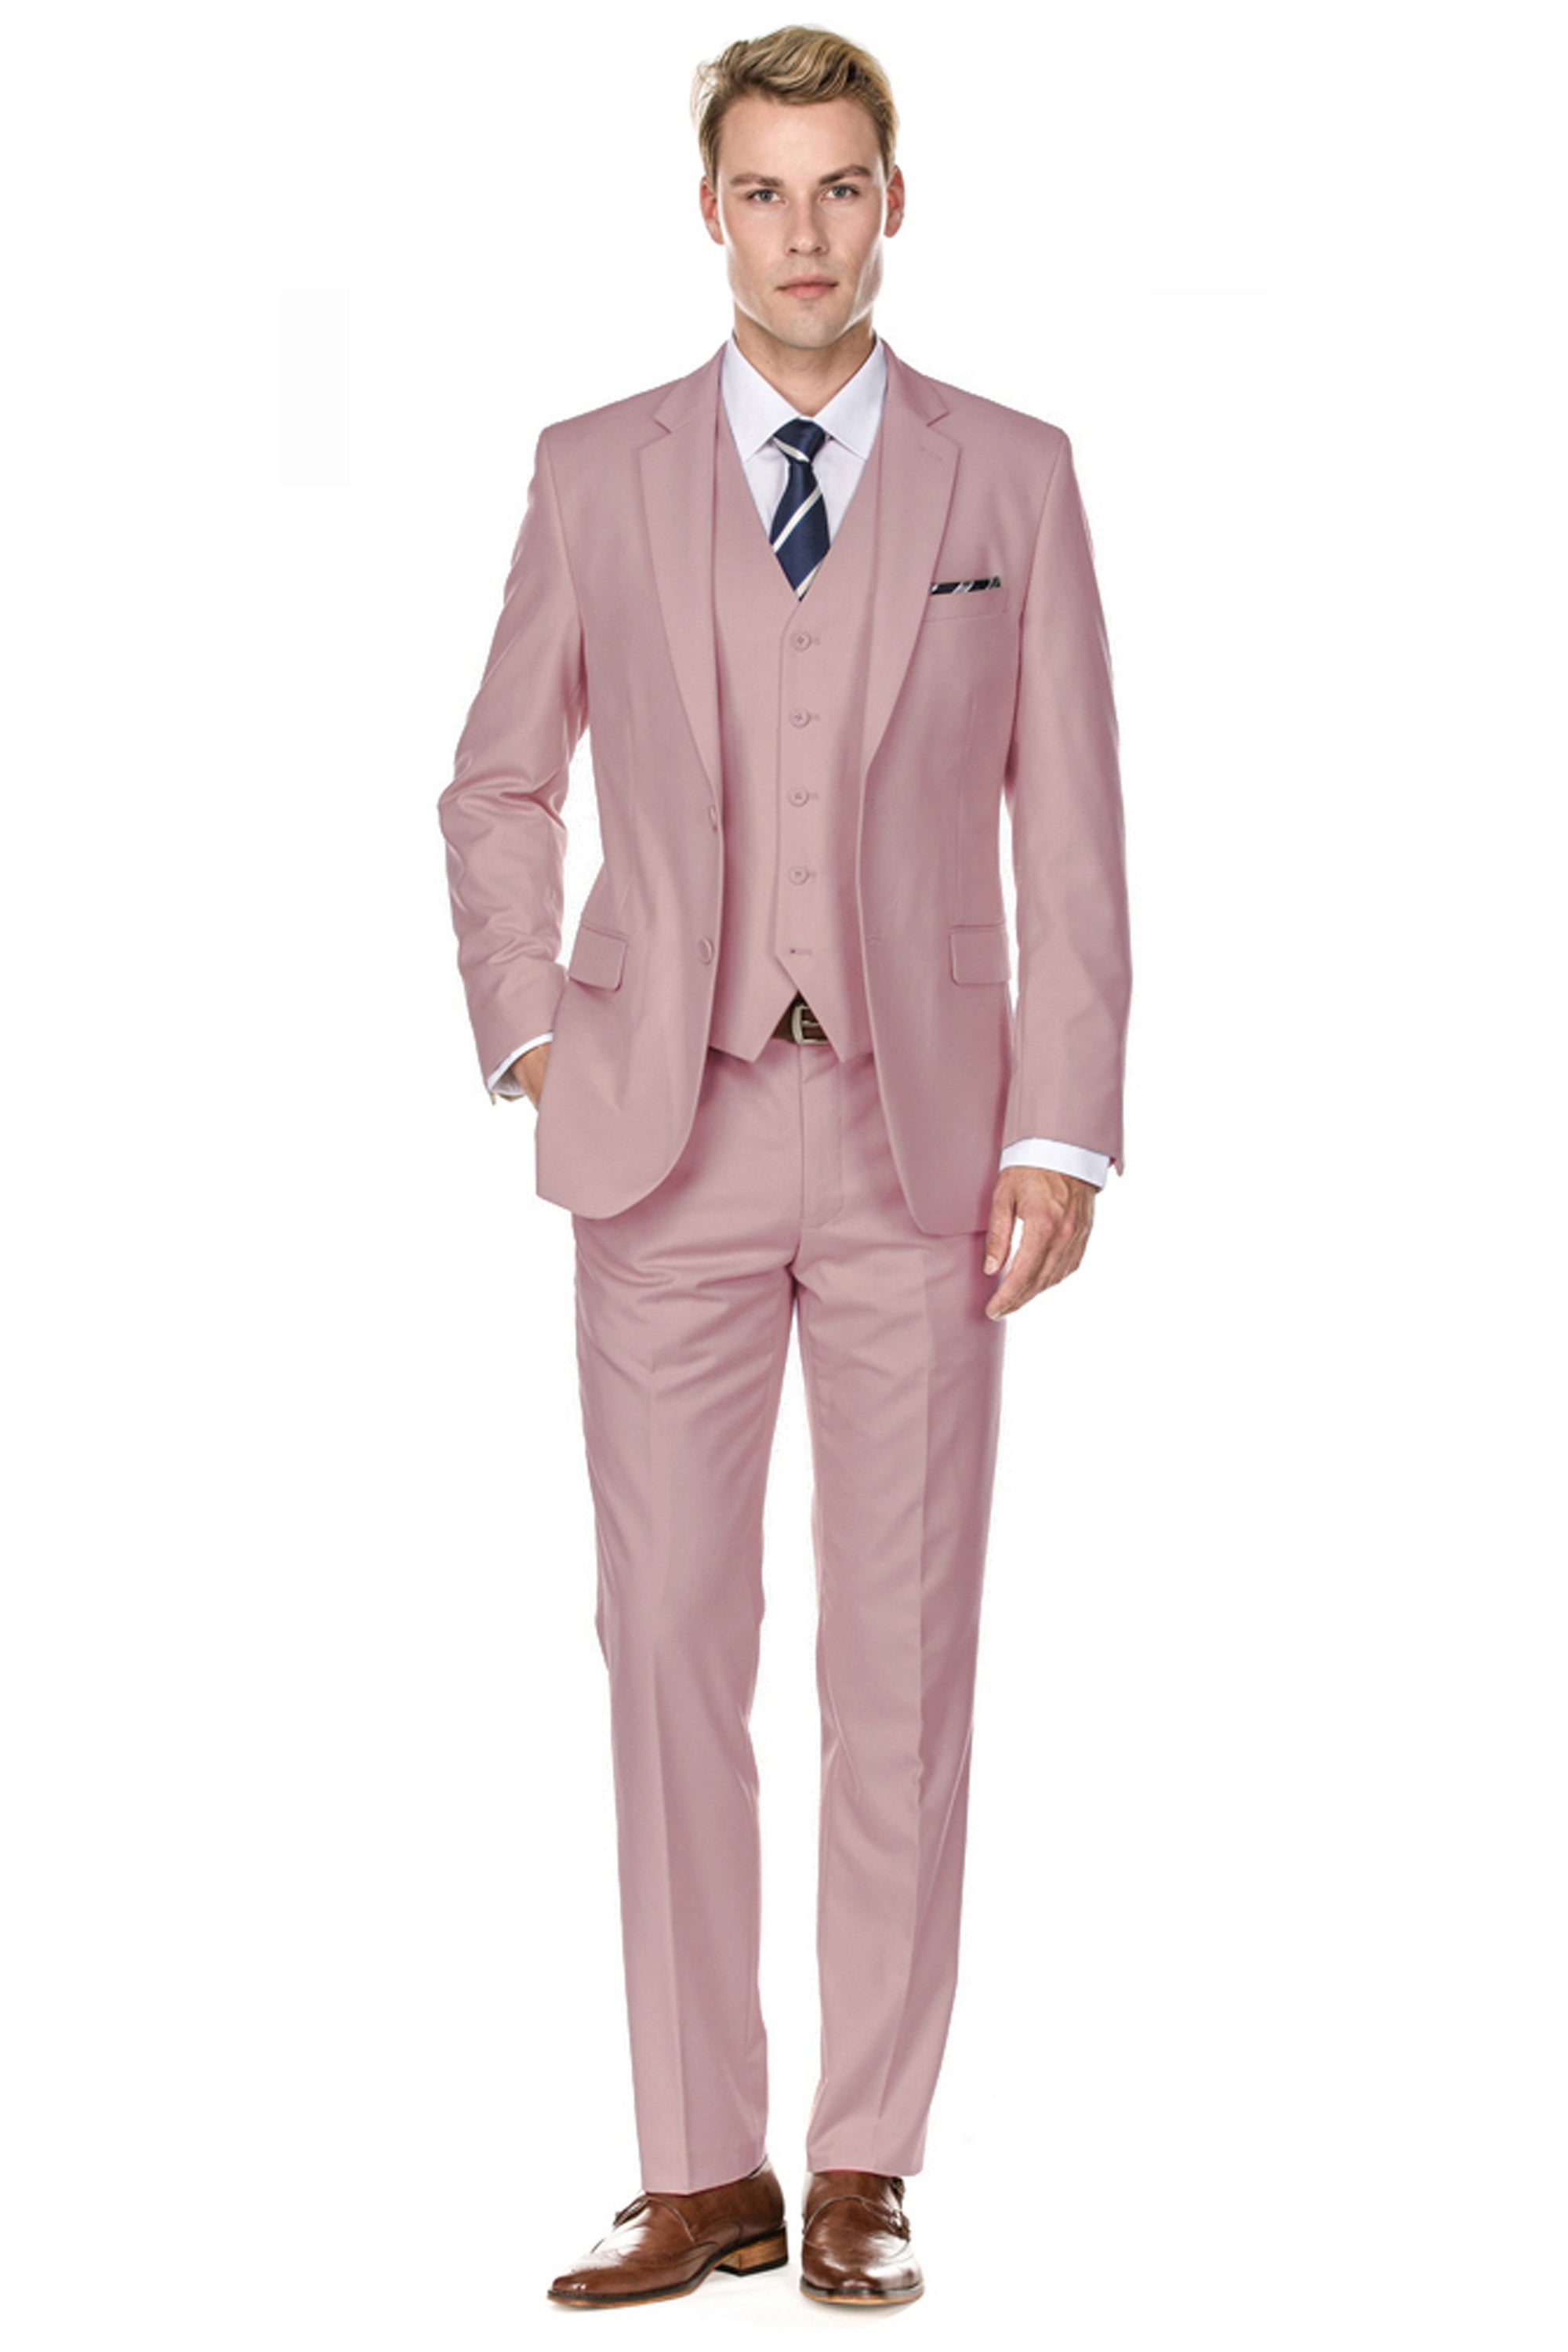 Frac / Tight - Complete man frac suits Tailored Frac / Tight